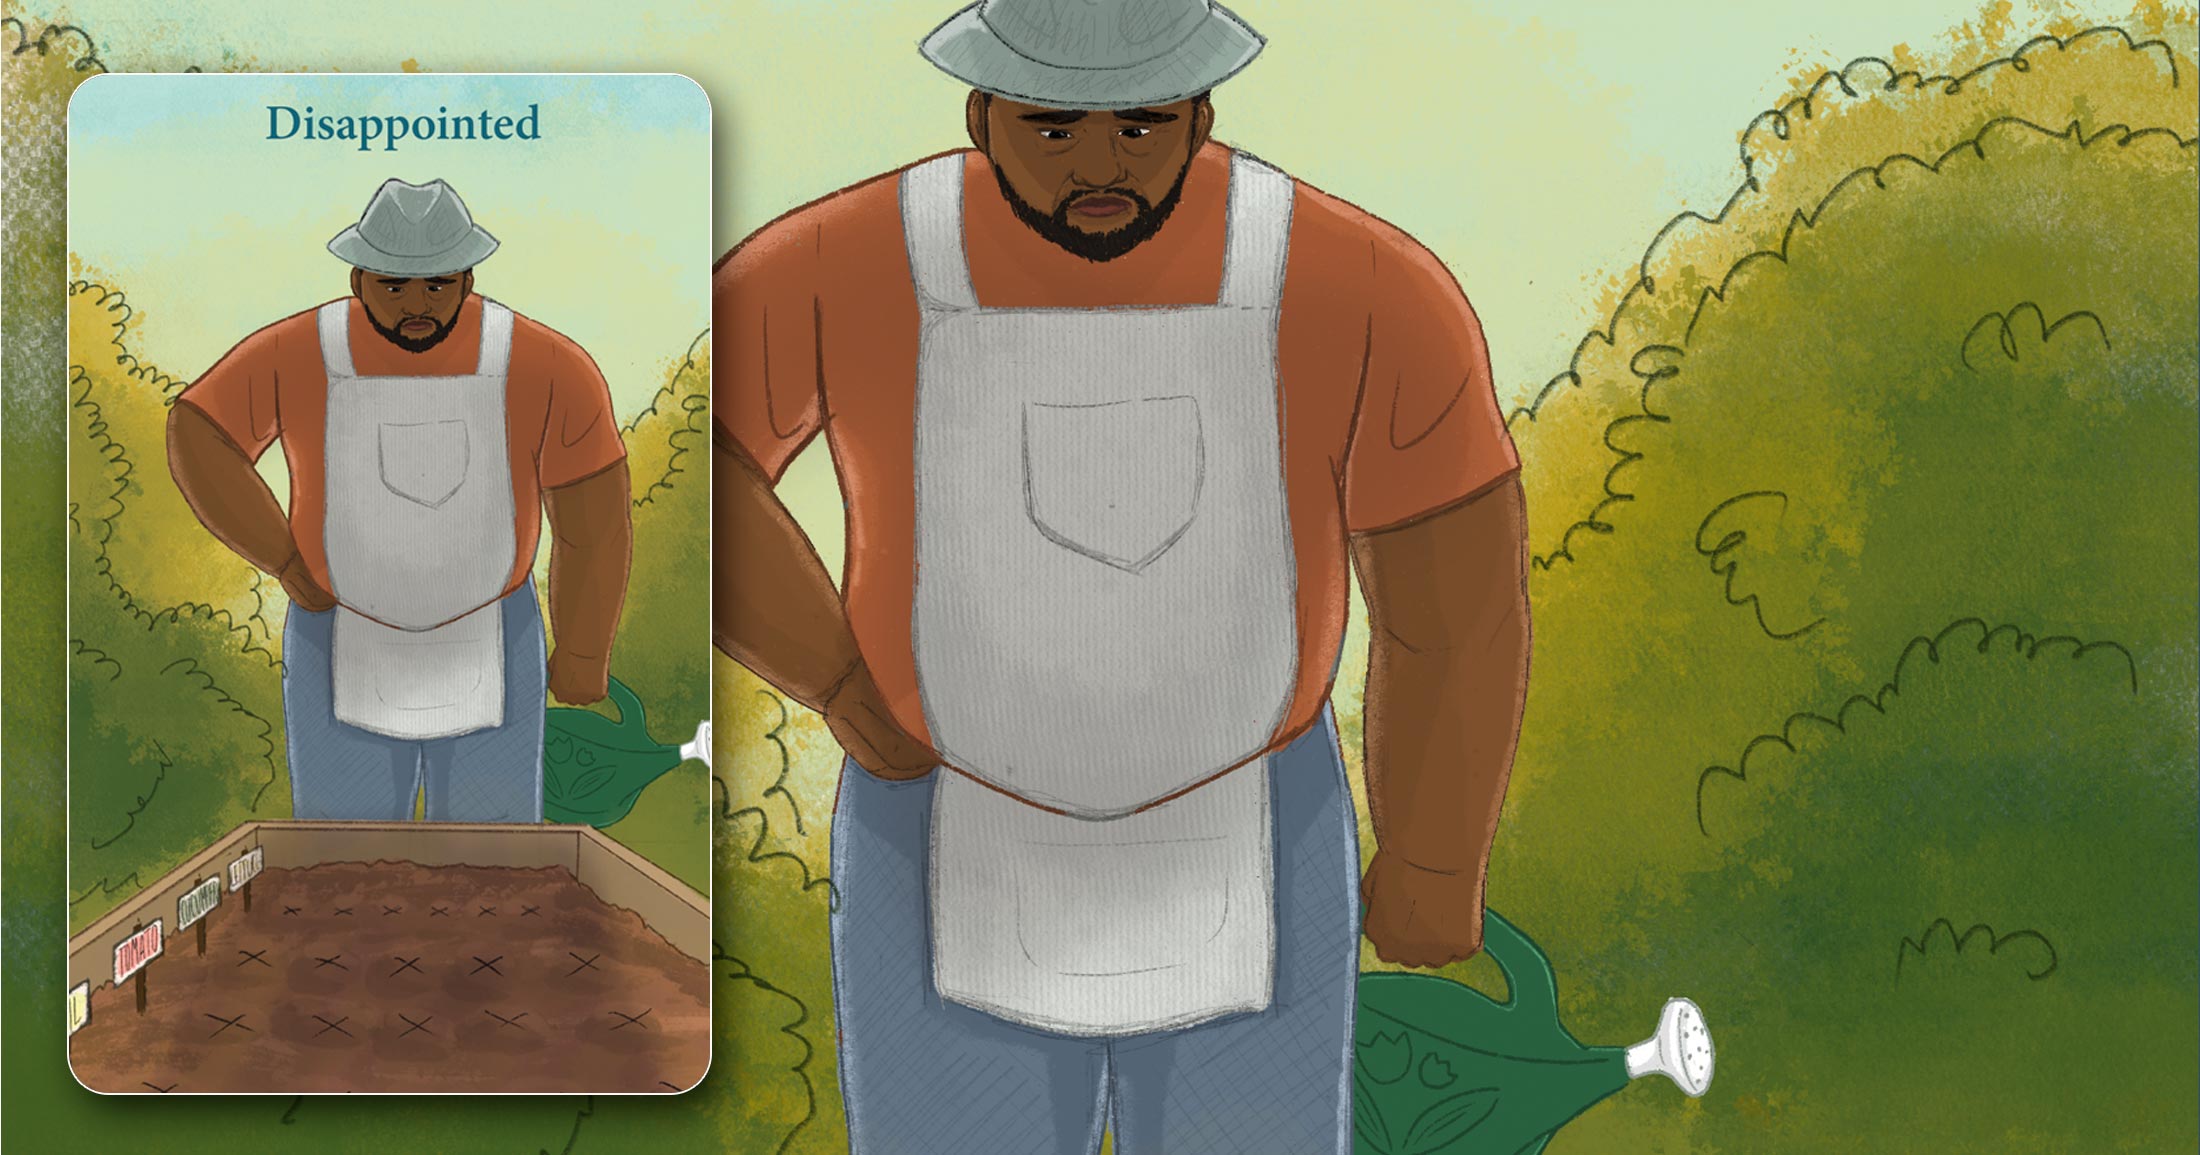 An illustration of a large Black man wearing a gardening apron and a dapper hat, holding a watering can, looking over his raised garden of lettuce and cucumber and tomatoes, but nothing has started to come up and he has an expression of disappointment and his body posture is also one of disappointment.